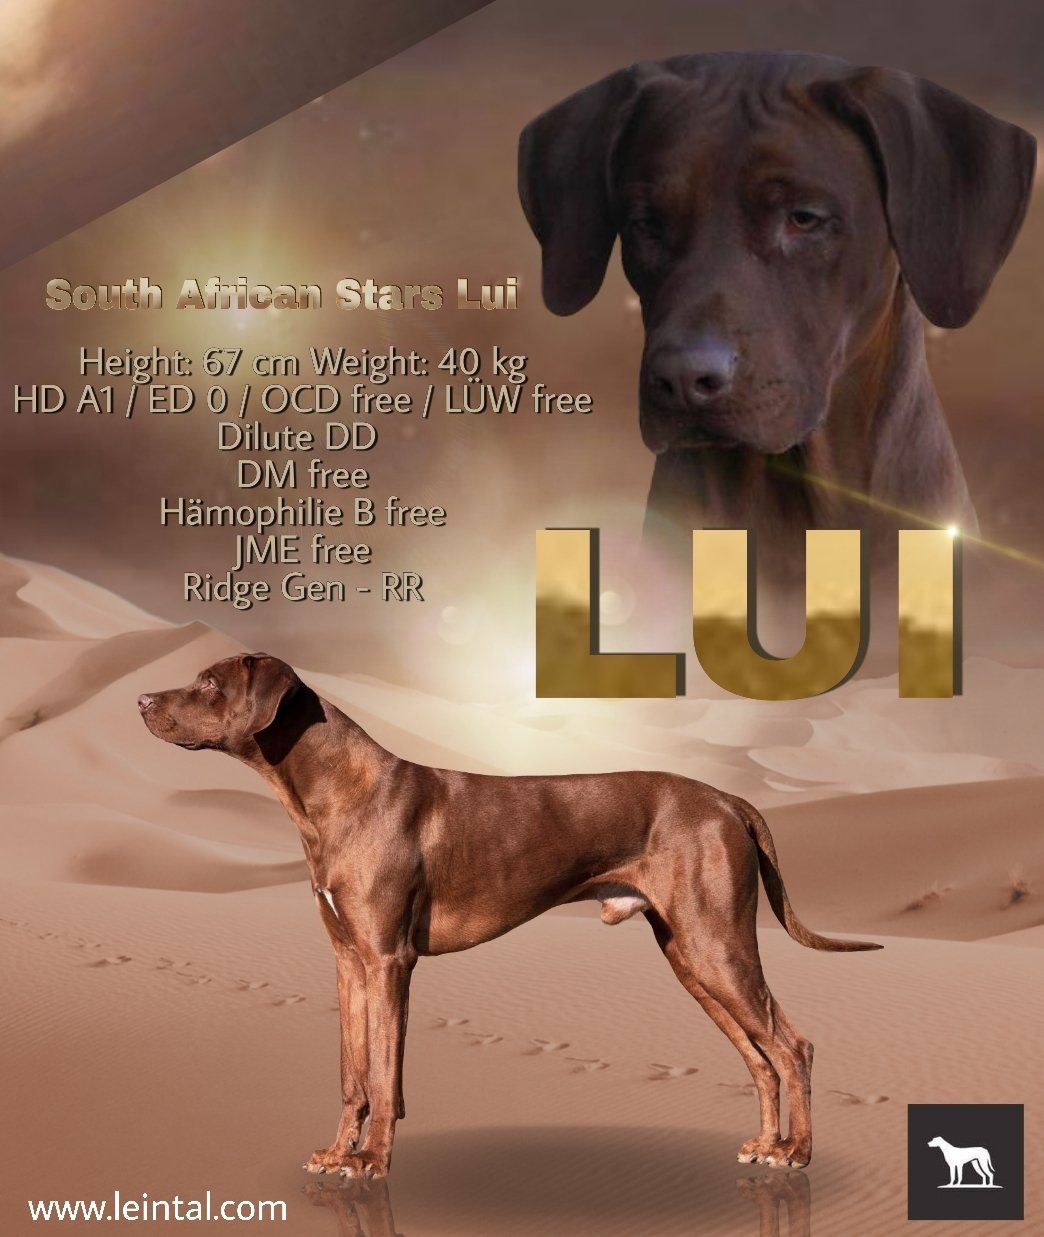 South African Star´s Lui